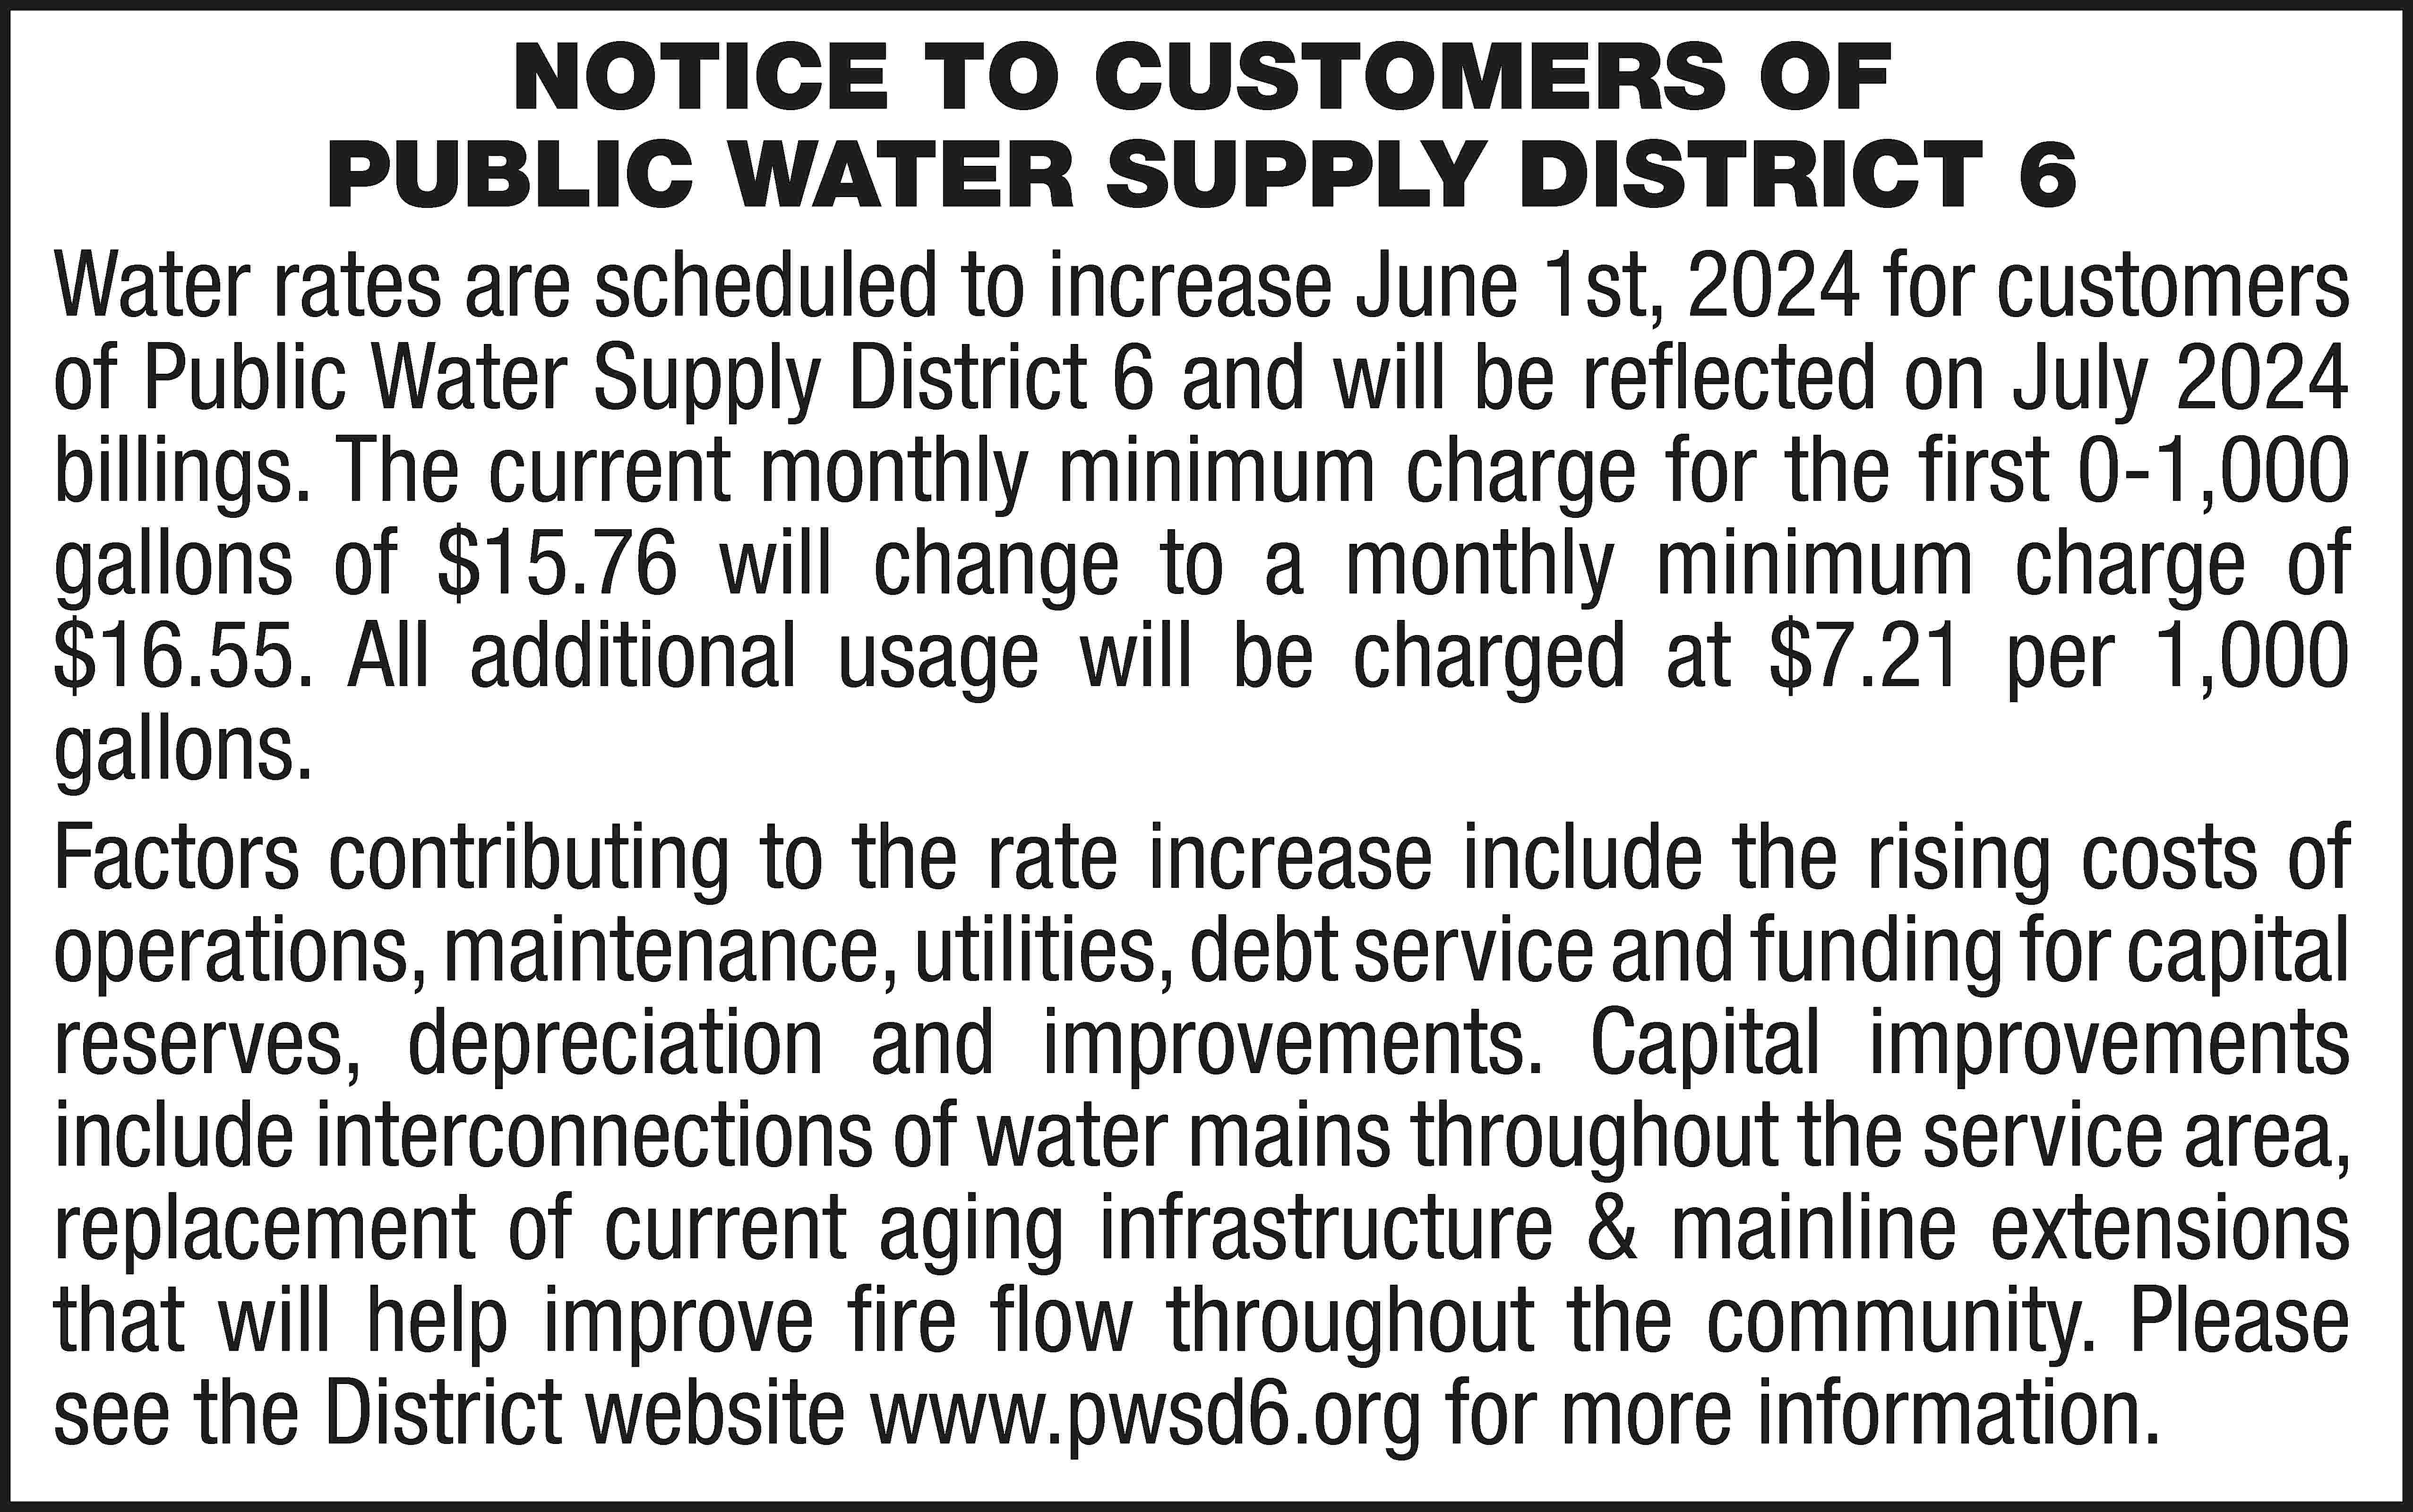 NOTICE TO CUSTOMERS OF PUBLIC  NOTICE TO CUSTOMERS OF PUBLIC WATER SUPPLY DISTRICT 6 Water rates are scheduled to increase June 1st, 2024 for customers of Public Water Supply District 6 and will be reflected on July 2024 billings. The current monthly minimum charge for the first 0-1,000 gallons of $15.76 will change to a monthly minimum charge of $16.55. All additional usage will be charged at $7.21 per 1,000 gallons. Factors contributing to the rate increase include the rising costs of operations, maintenance, utilities, debt service and funding for capital reserves, depreciation and improvements. Capital improvements include interconnections of water mains throughout the service area, replacement of current aging infrastructure & mainline extensions that will help improve fire flow throughout the community. Please see the District website www.pwsd6.org for more information.